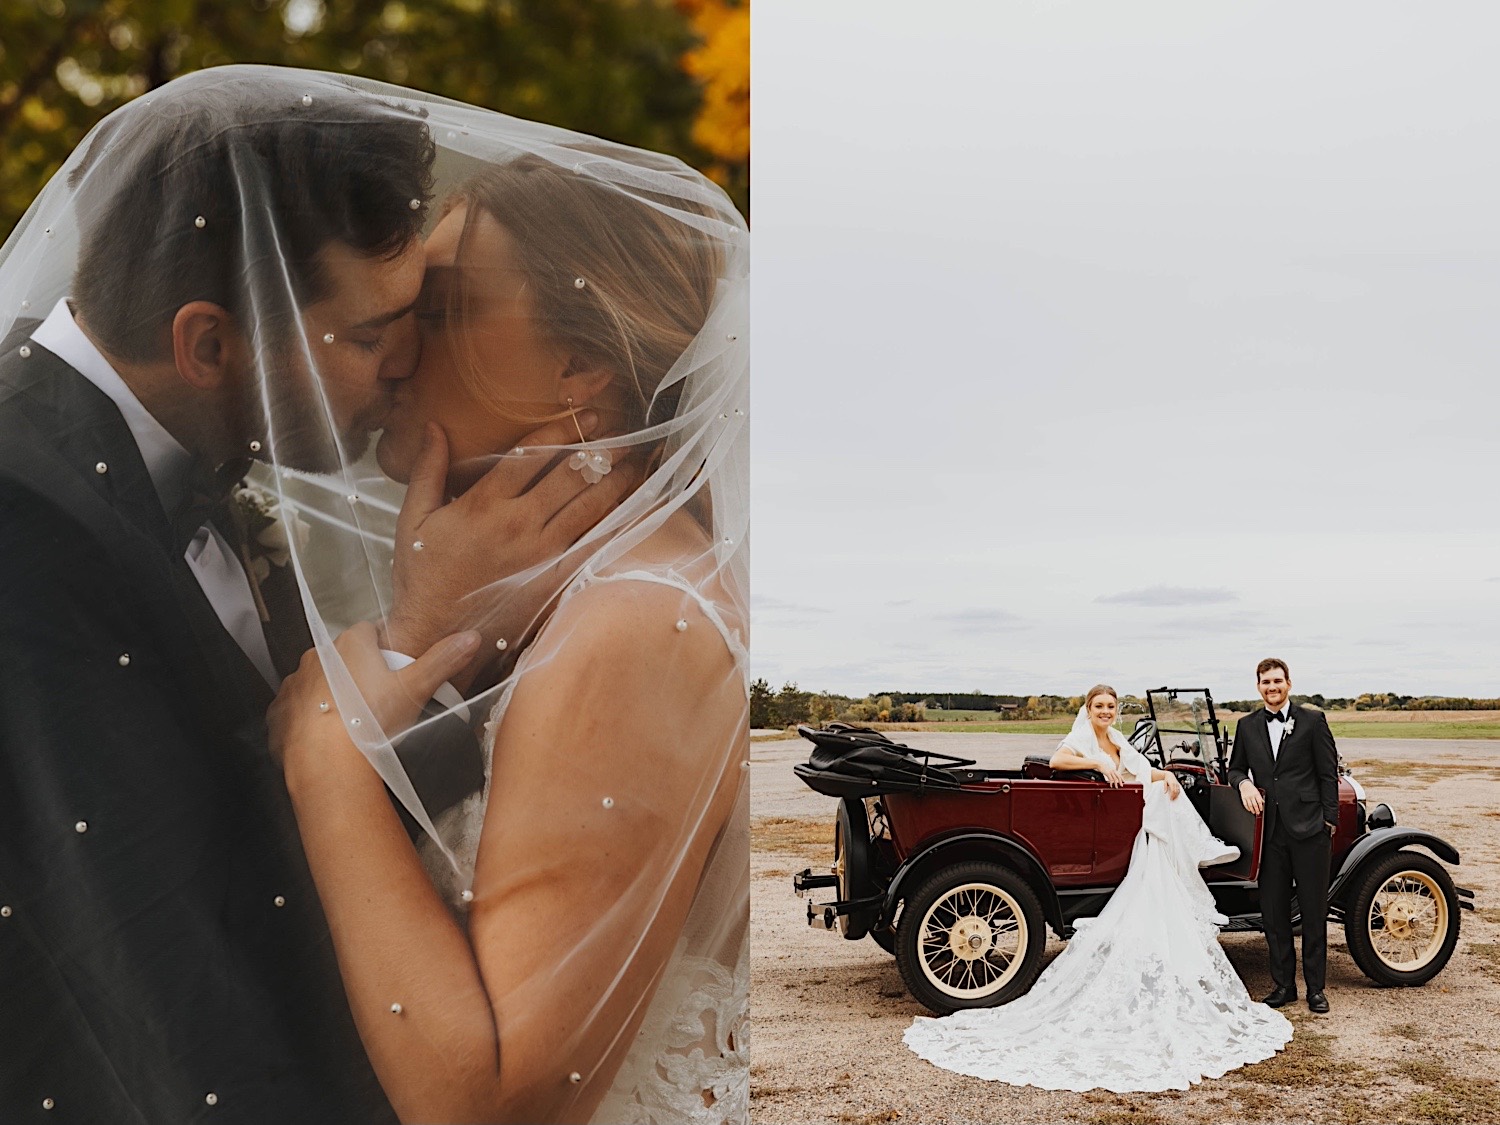 2 photos side by side, the left is of a bride and groom kissing under the bride's veil, the right is of a bride and groom posing for a photo next to a classic car